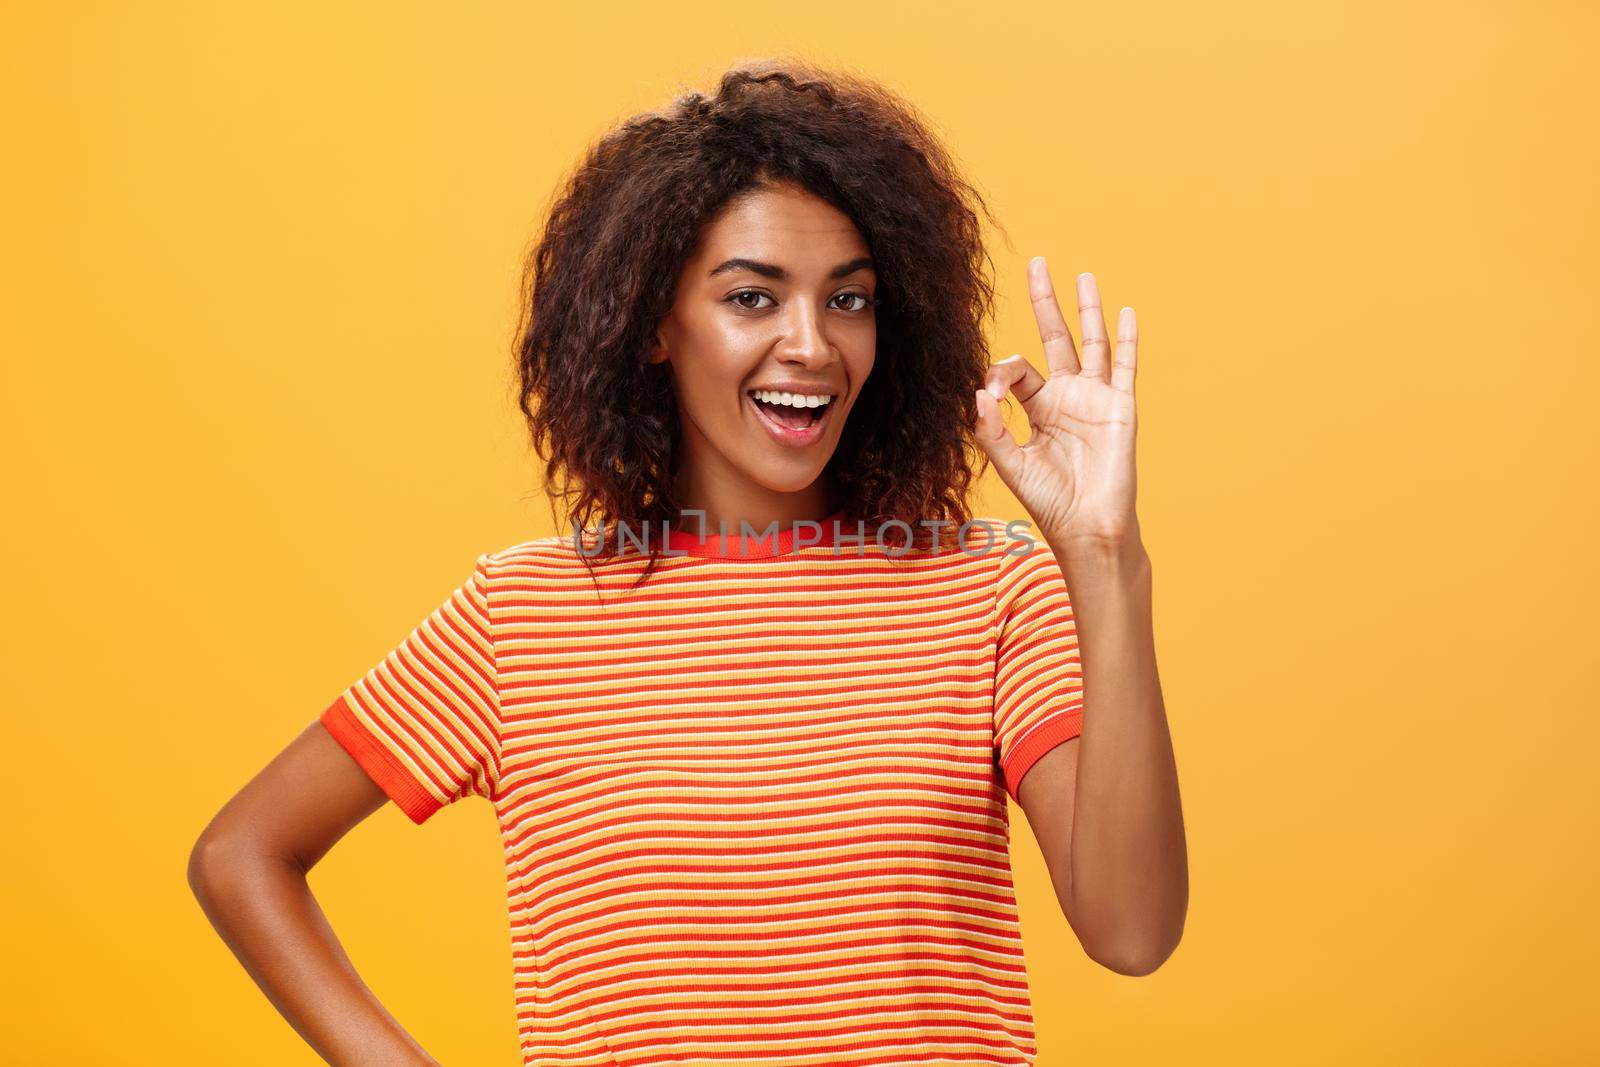 I got it, think it done. Portrait of self-assured good-looking calm and carefree african american woman with curly hairstyle raising ok or excellent gesture and smiling assuring she knows what doing. Body language concept